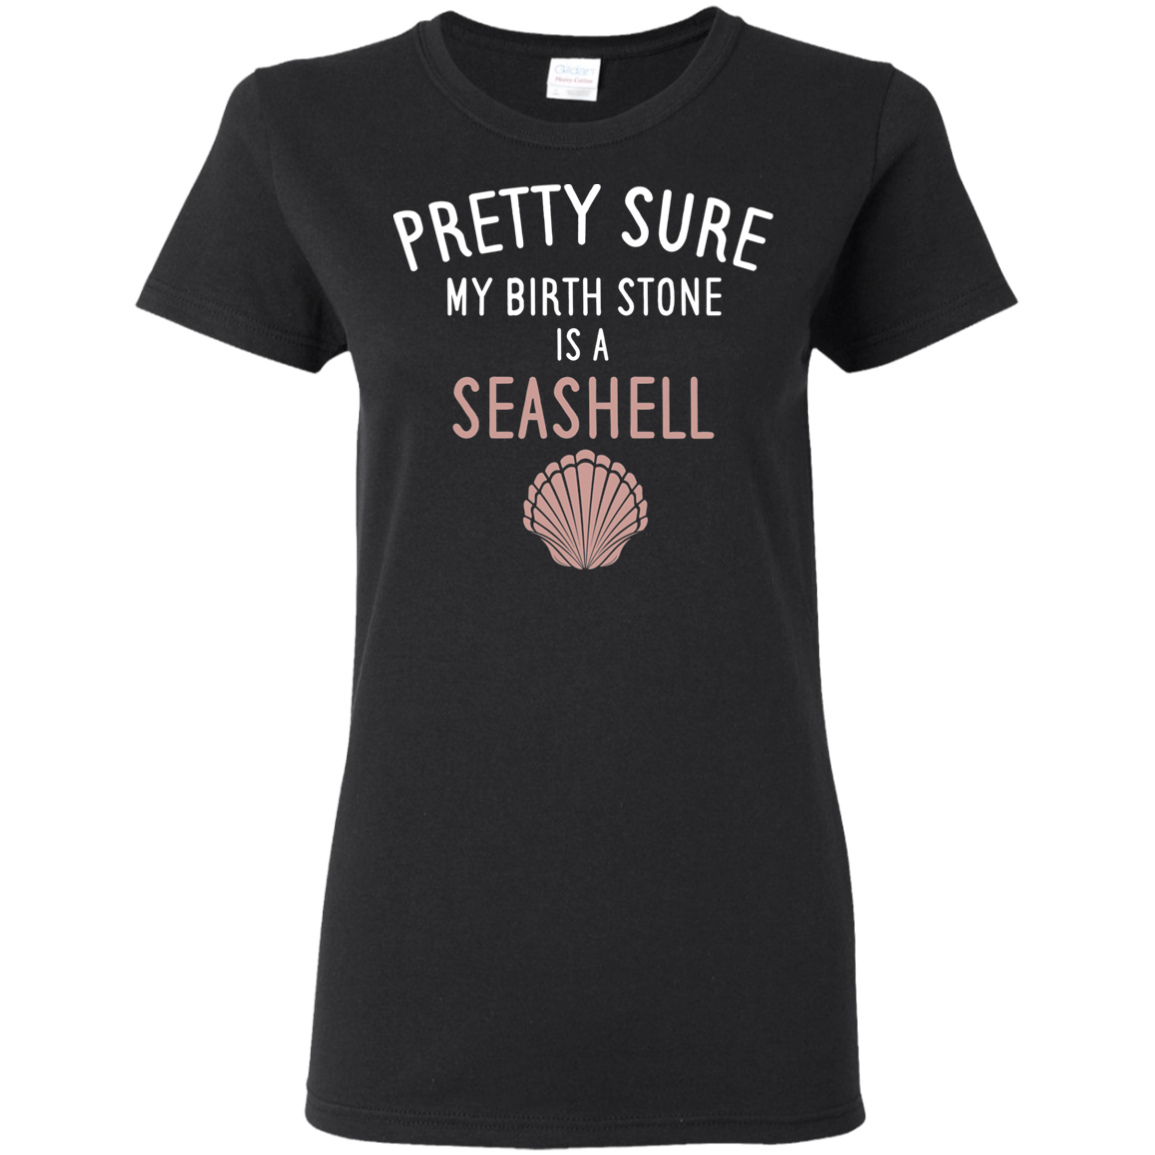 My Birthstone Is A Seashell - Ladies Fitted T